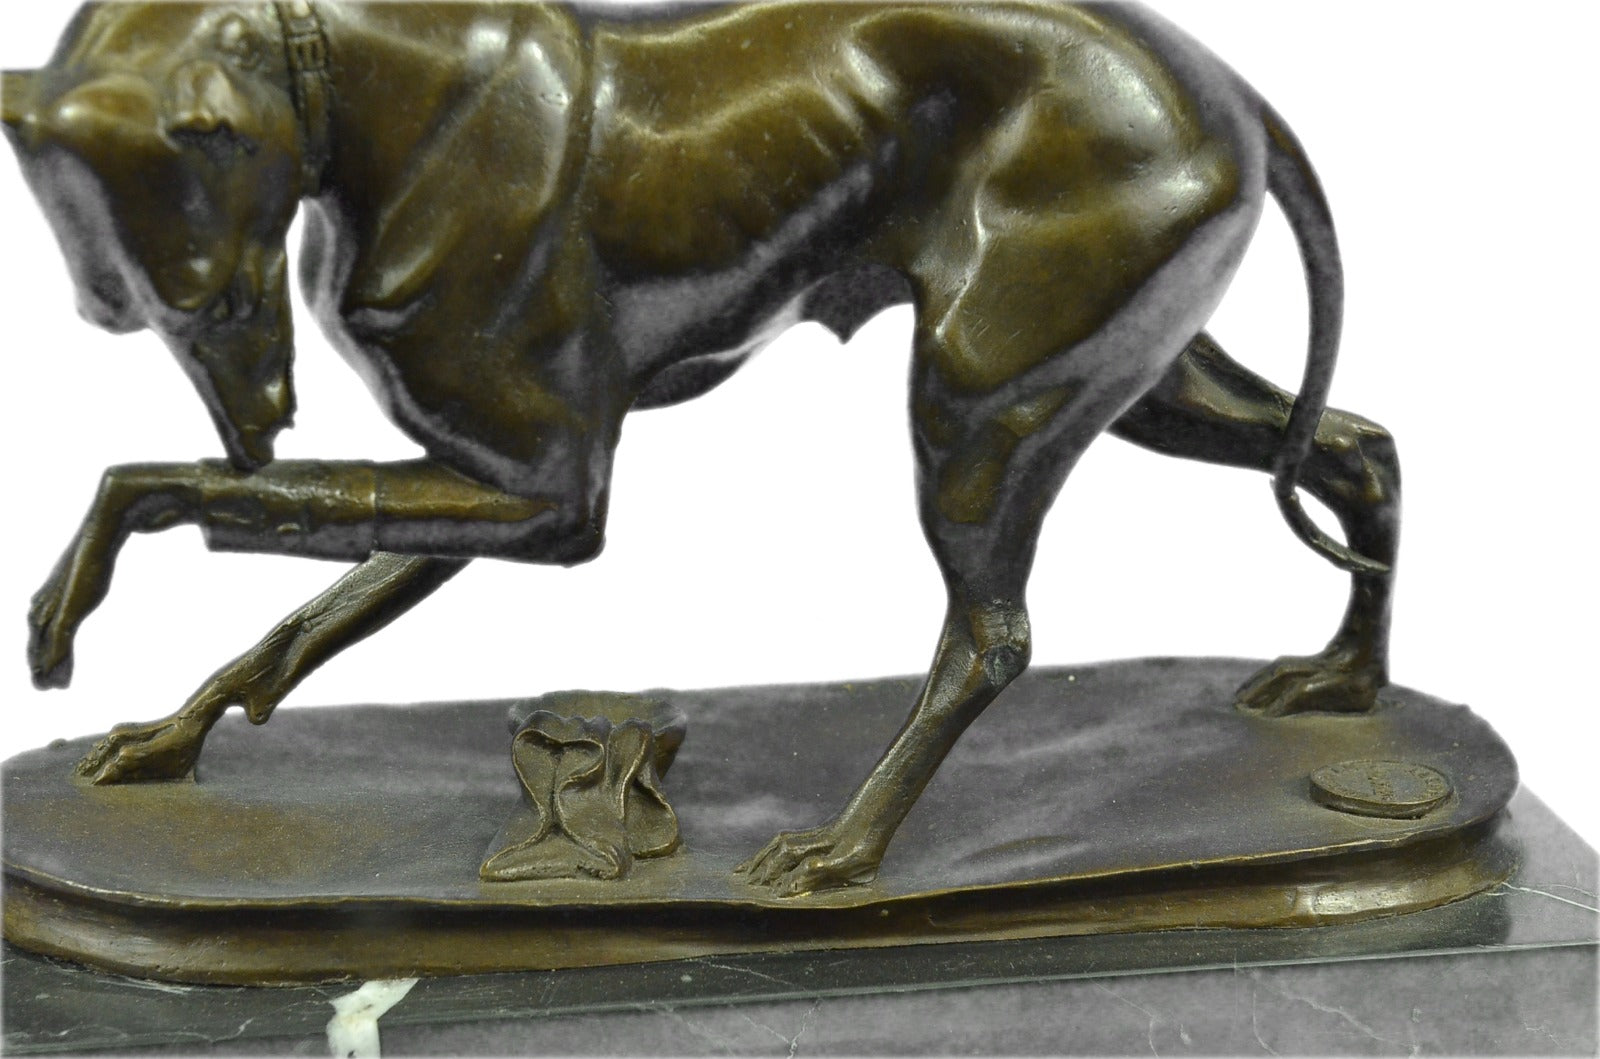 Handcrafted bronze sculpture SALE Base Marble On Hunting Animal Dogs Dog